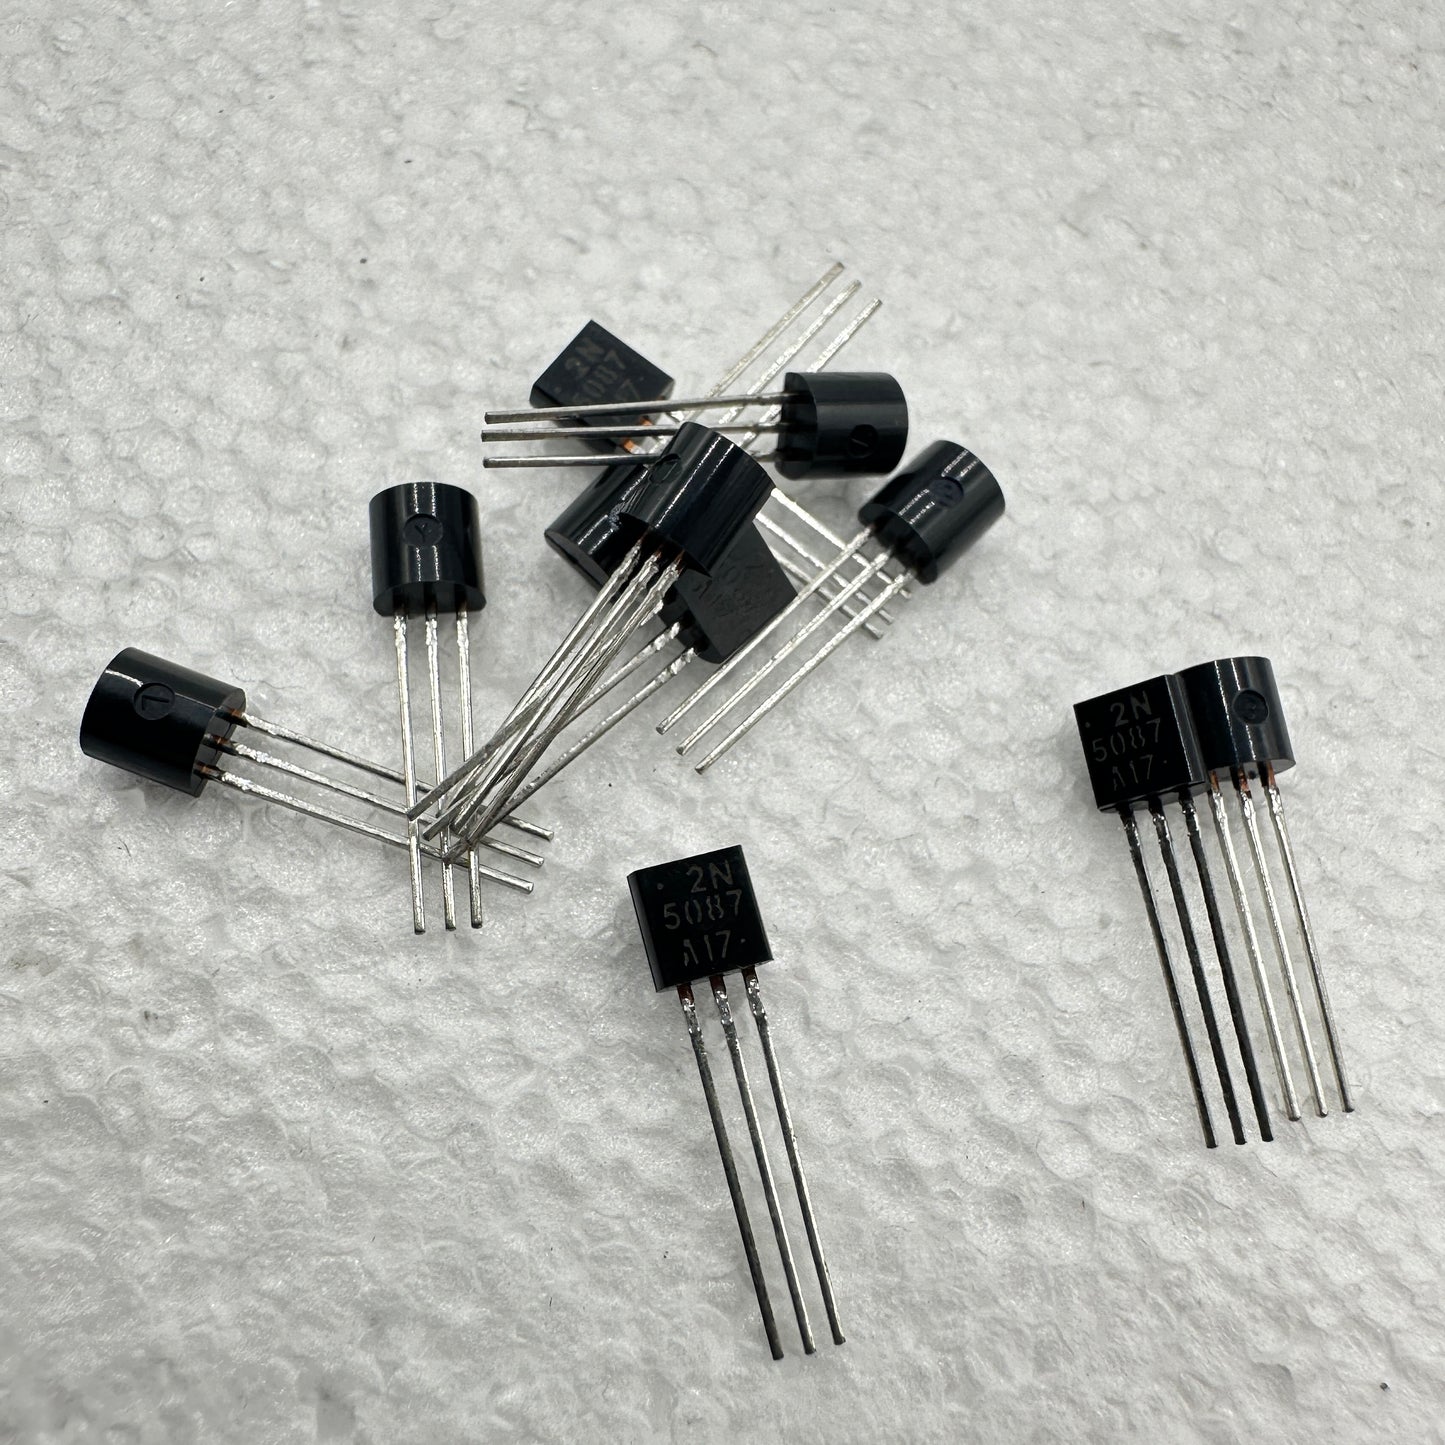 2N5807 Silicon Transistor, TO-92